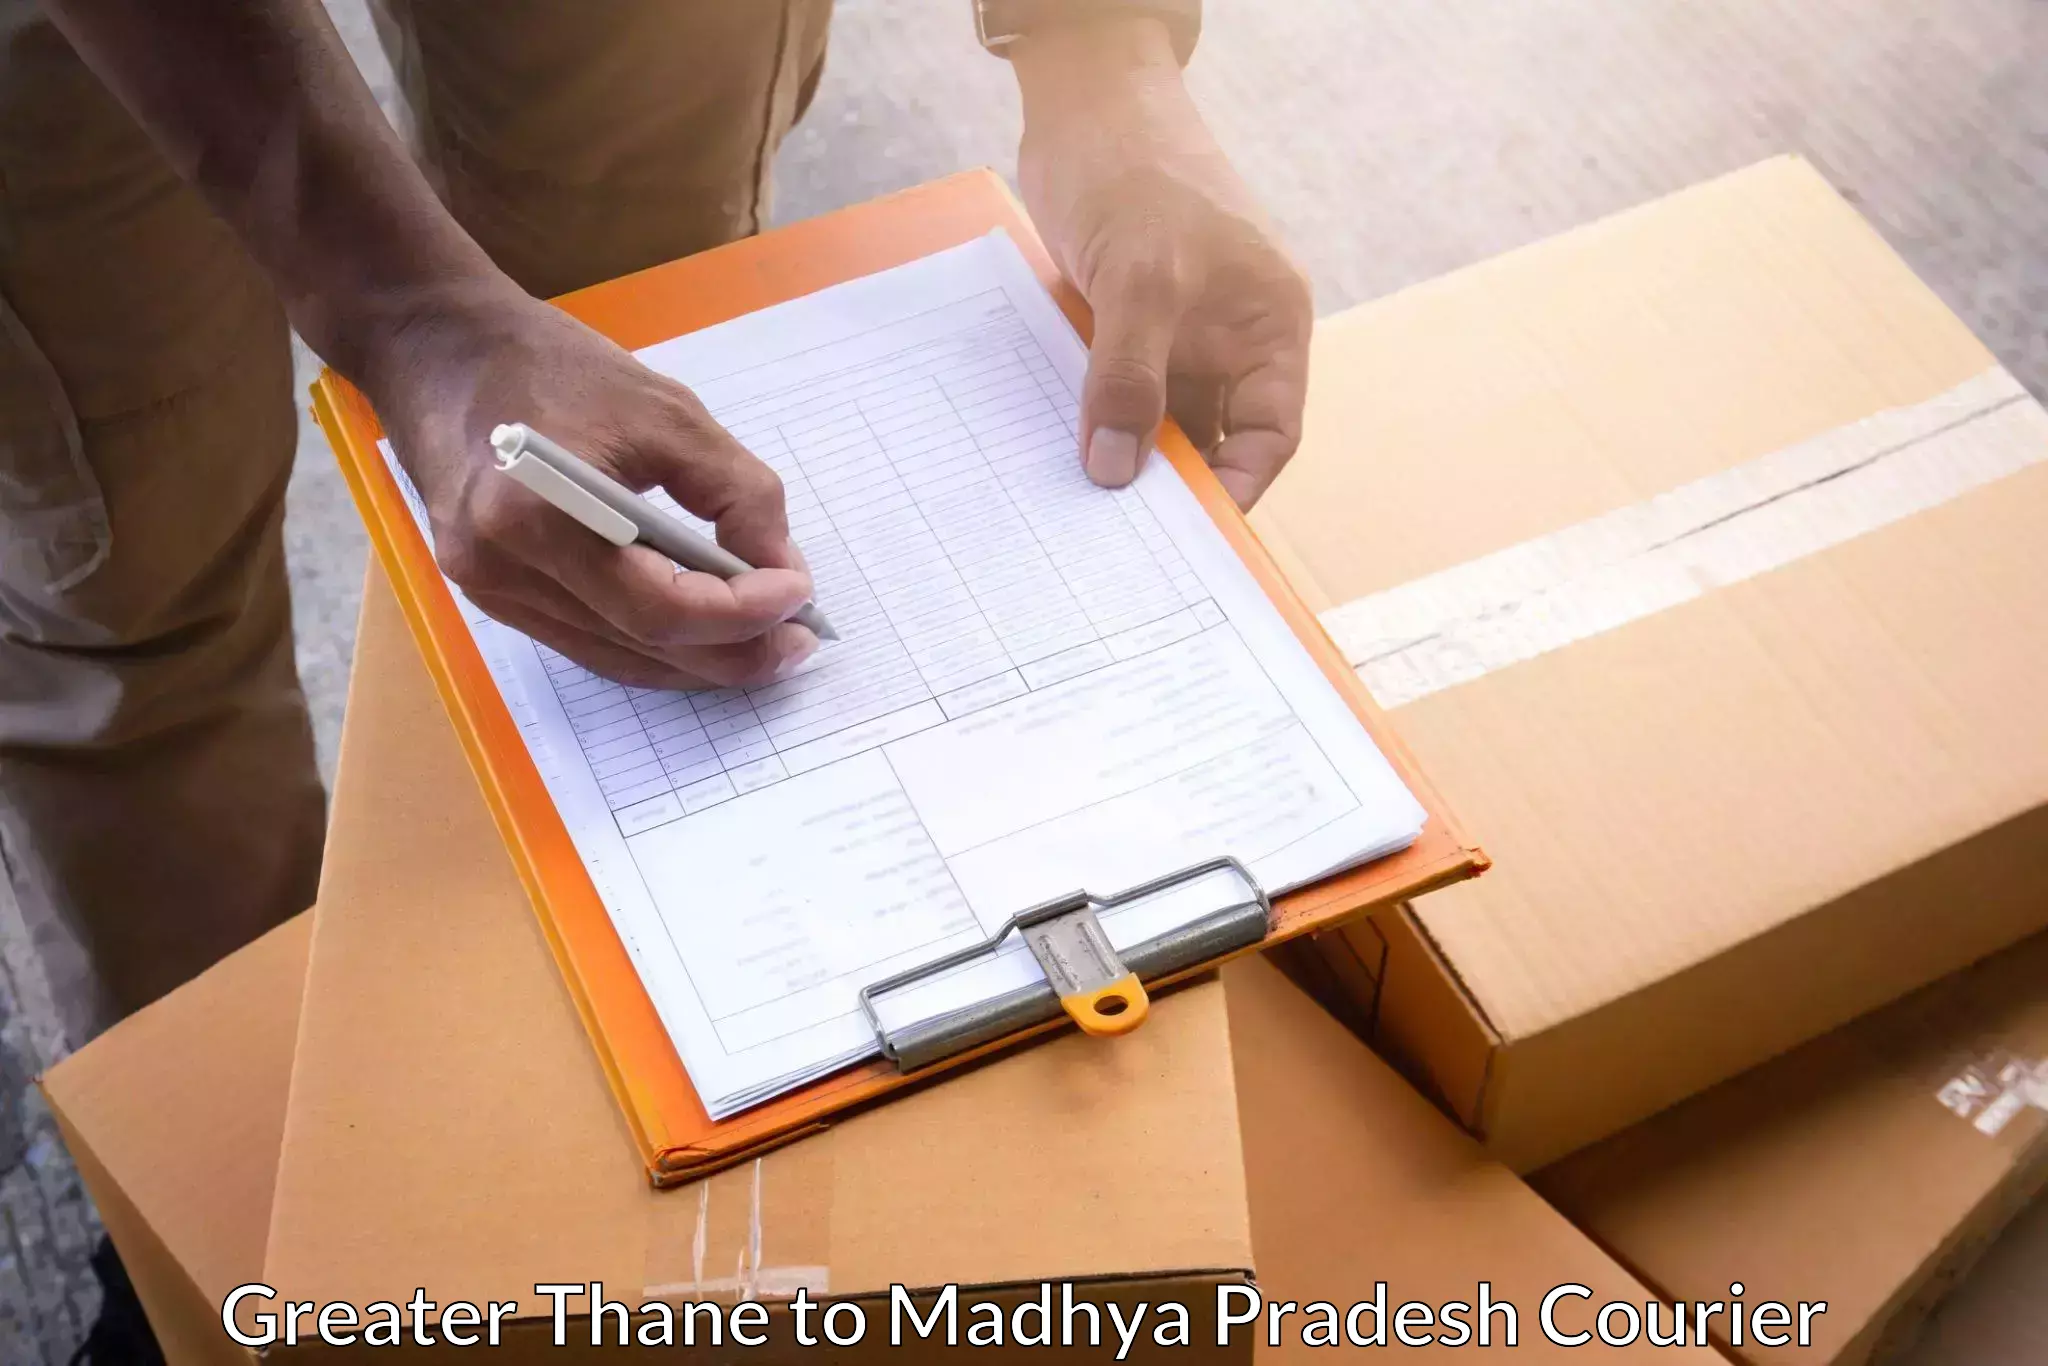 Courier service efficiency Greater Thane to Ashta